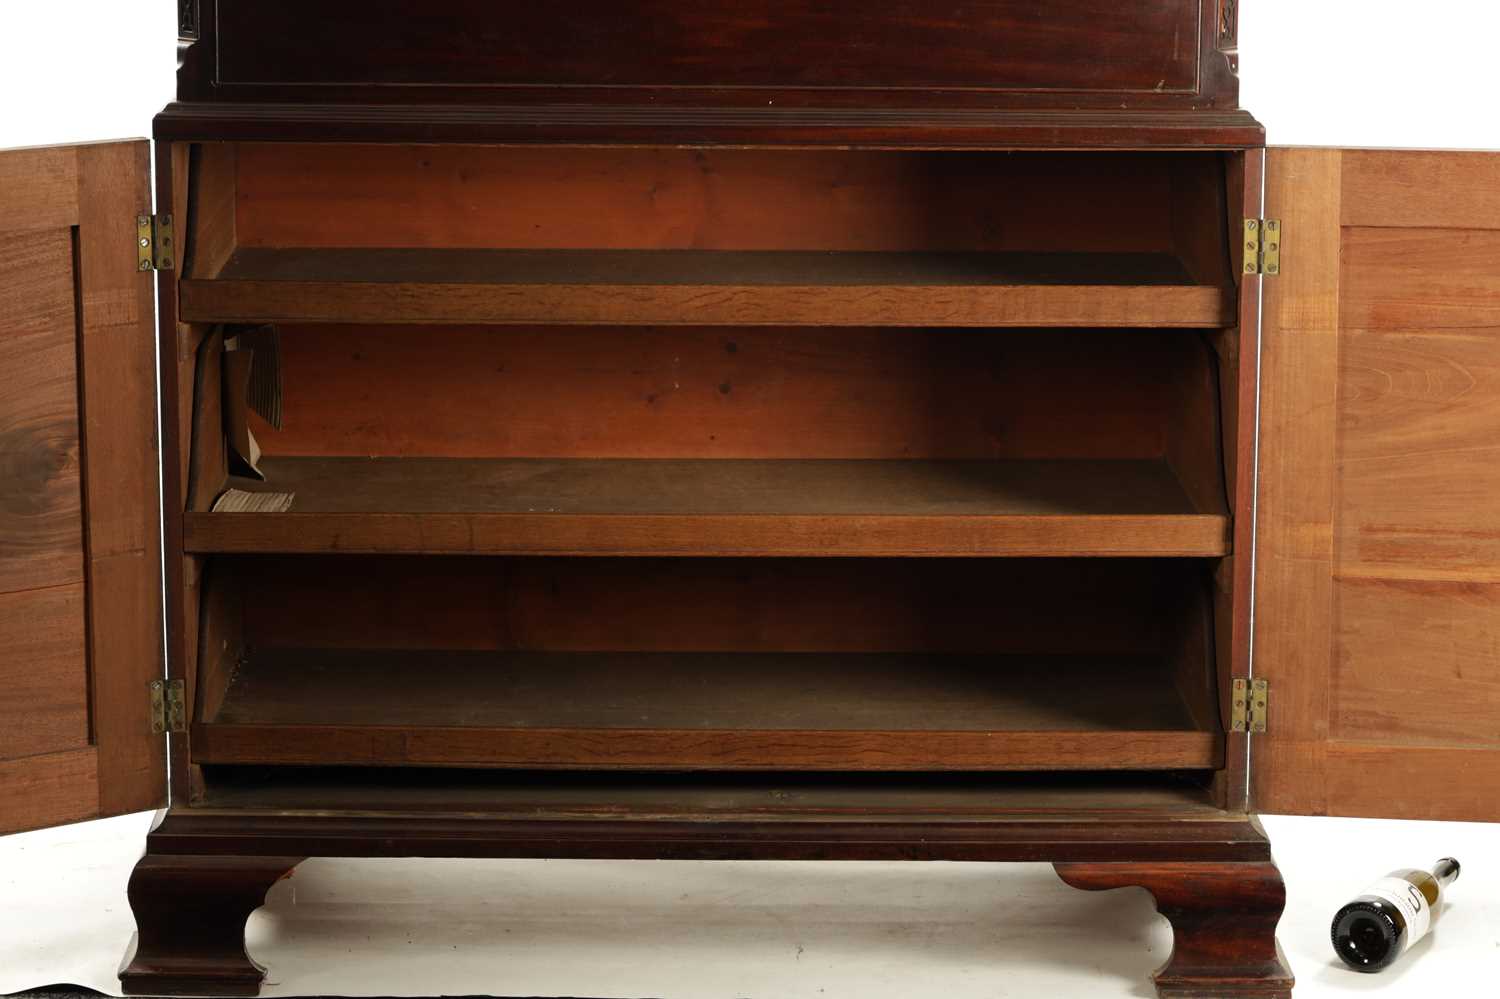 A FINE GEORGE III CHIPPENDALE DESIGN MAHOGANY SECRETAIRE CHEST ON CABINET FROM THE LILFORD ESTATE - Image 3 of 8